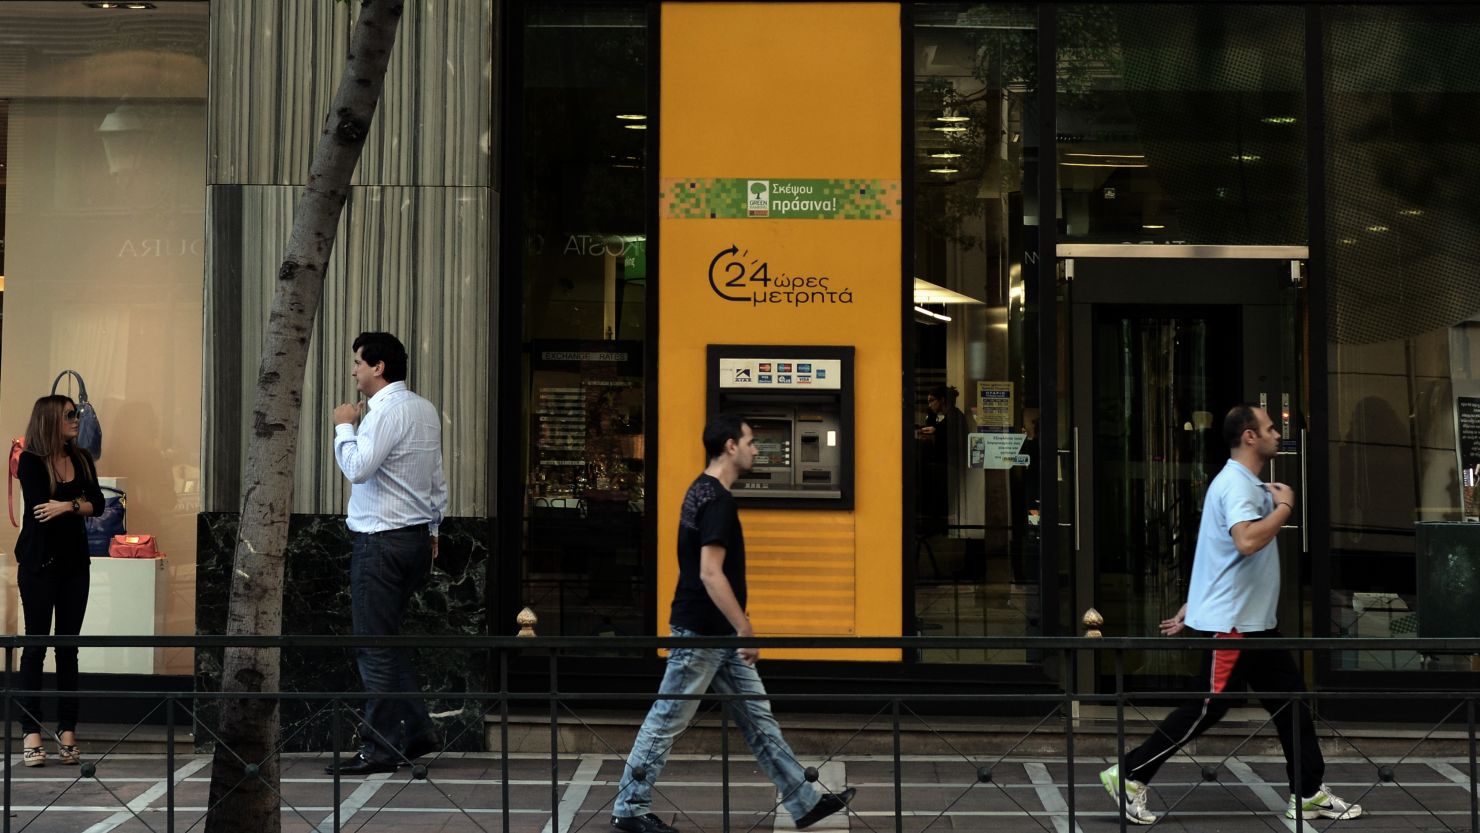 A Piraeus branch in Athens, October 19, 2012. Piraeus head Alex Manos says Greek banks will emerge stronger from the crisis.